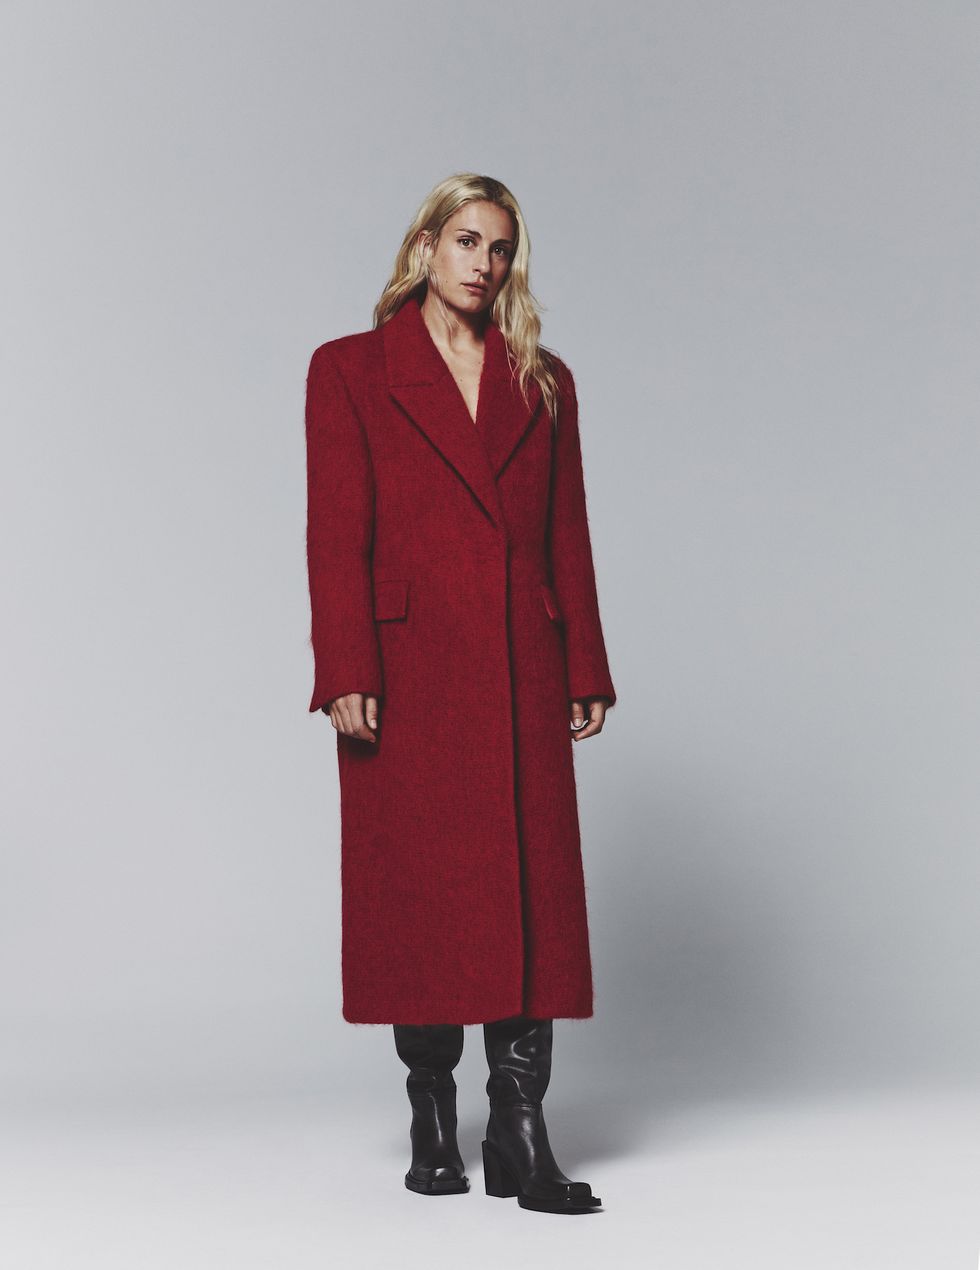 a woman in a red coat